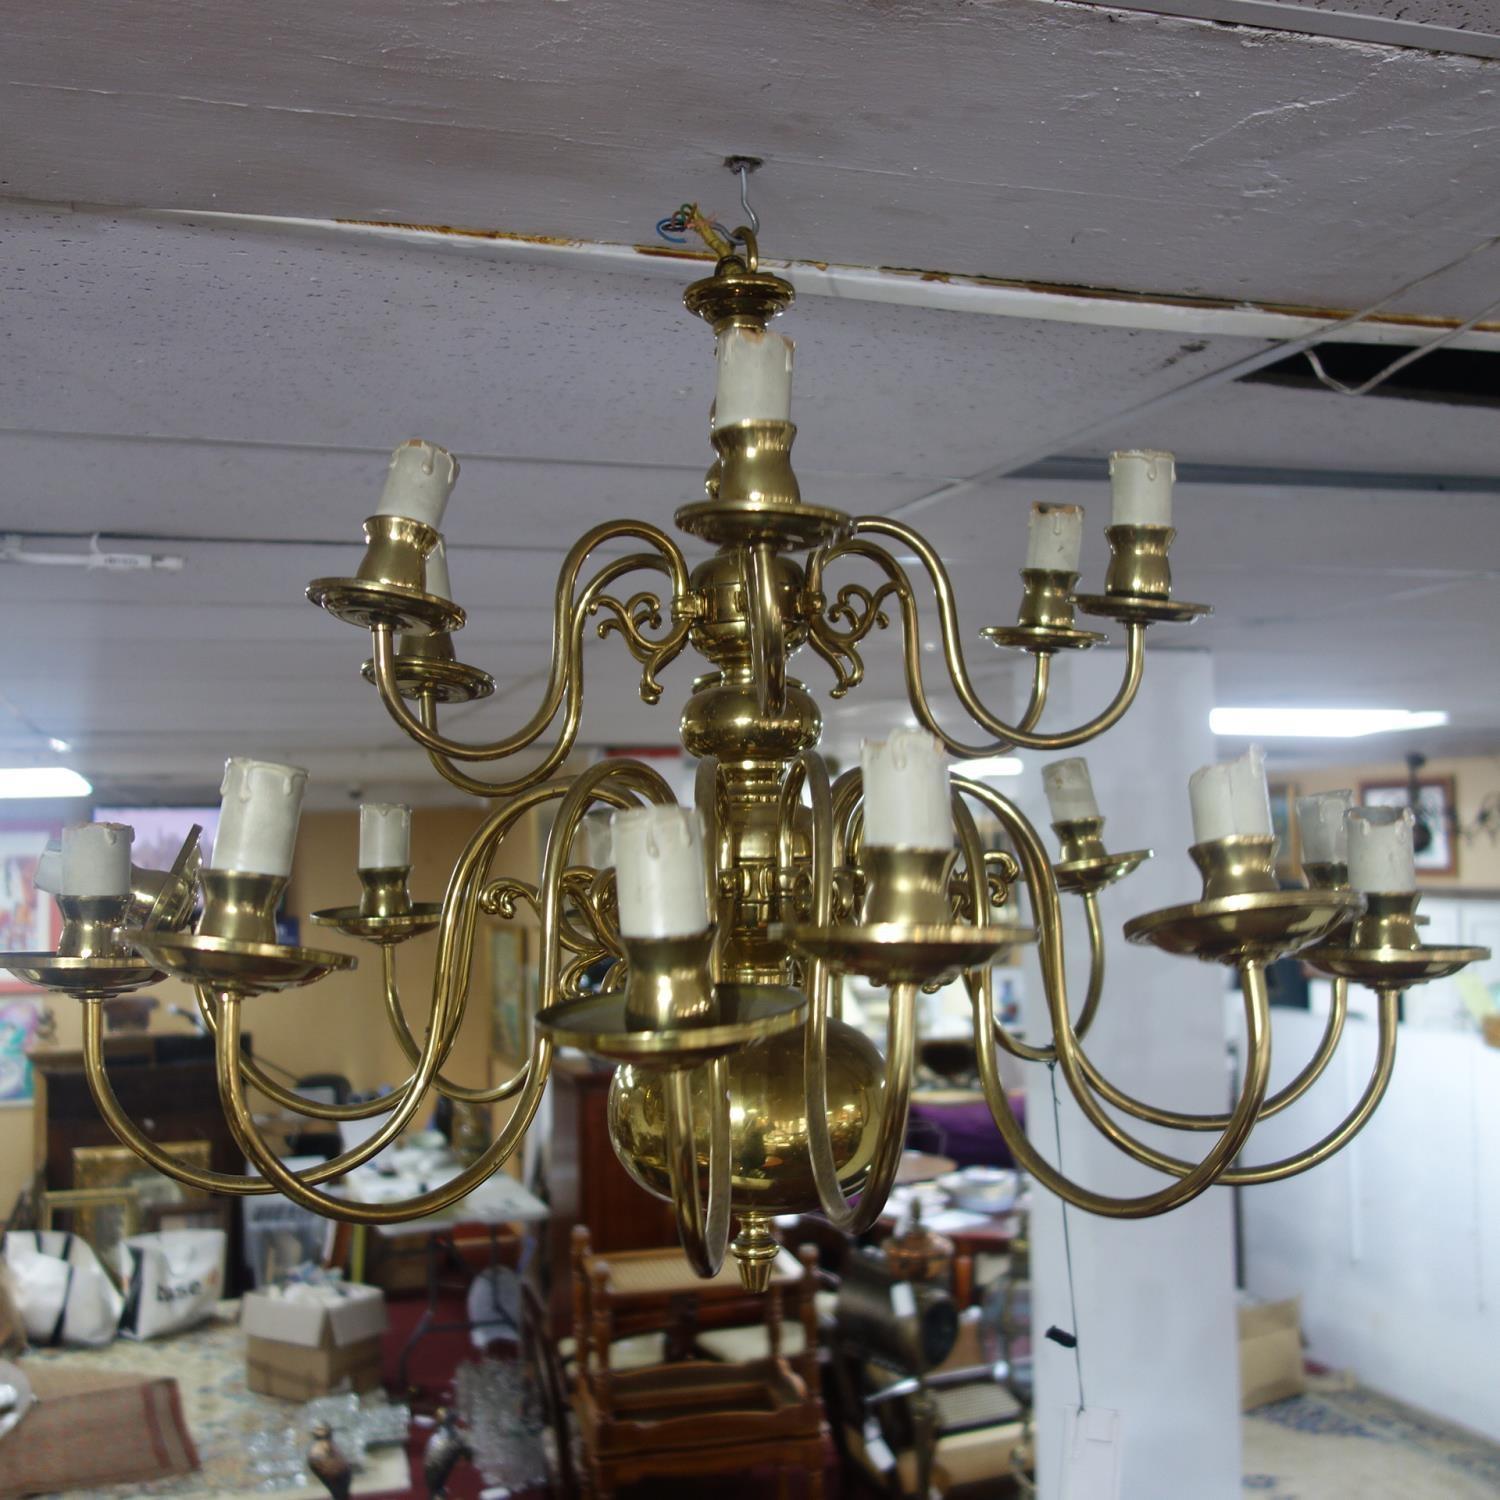 A pair of 18th century style Dutch 18 branch chandeliers - Image 2 of 4